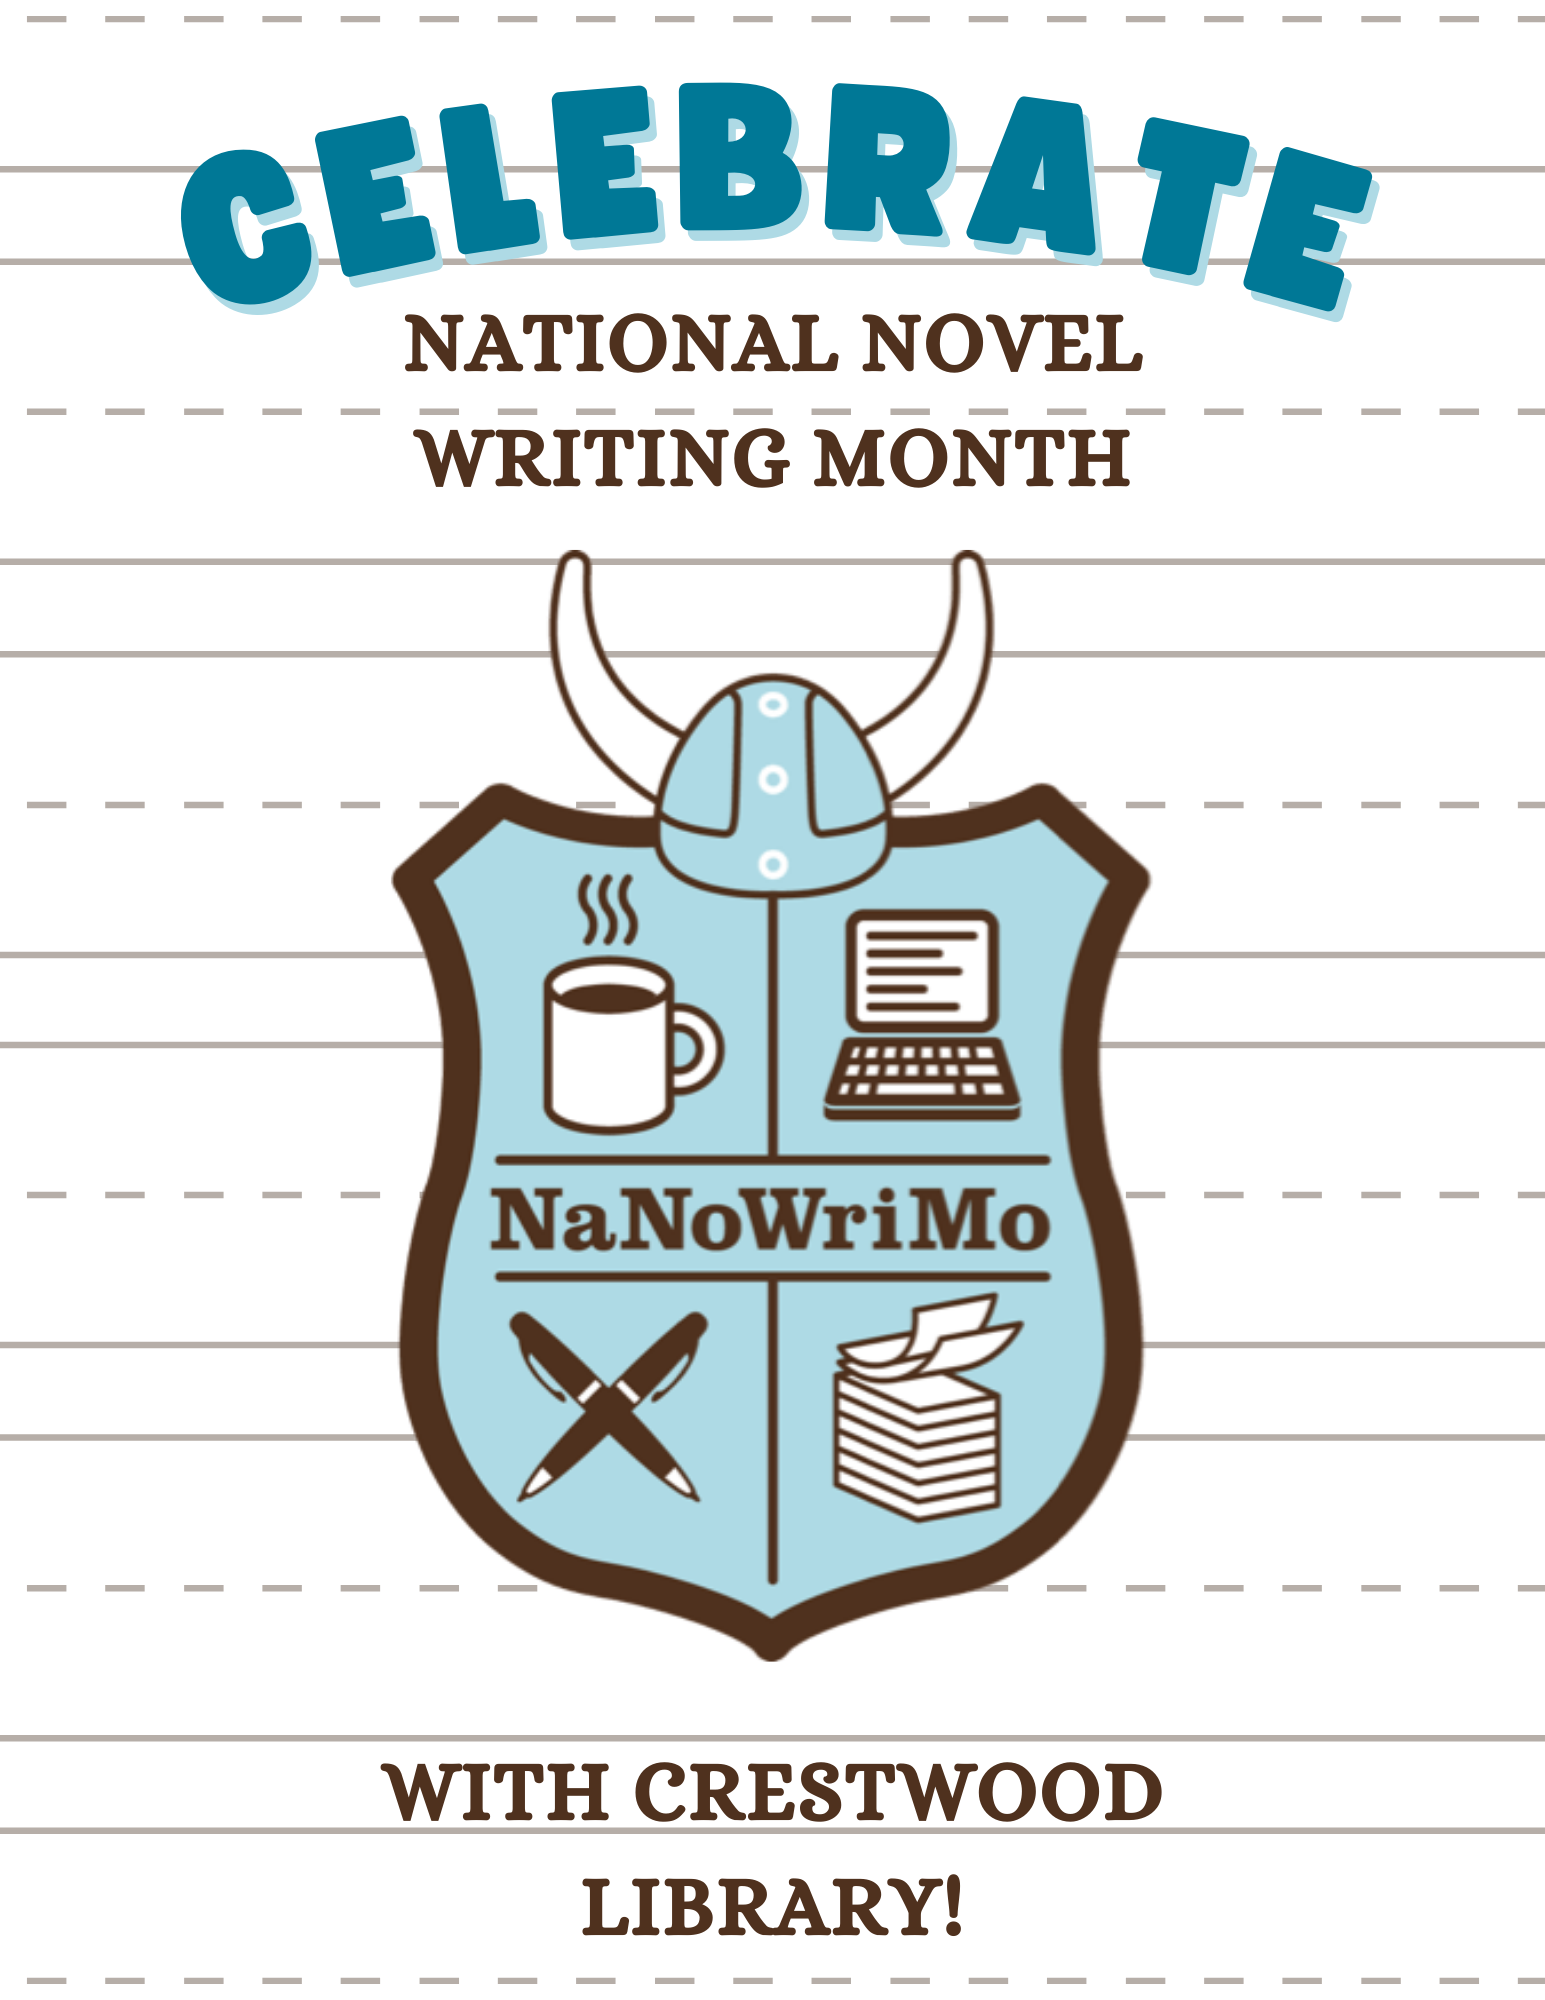 celebrate NaNoWriMo Month with Crestwood Library Crest of NaNoWriMo